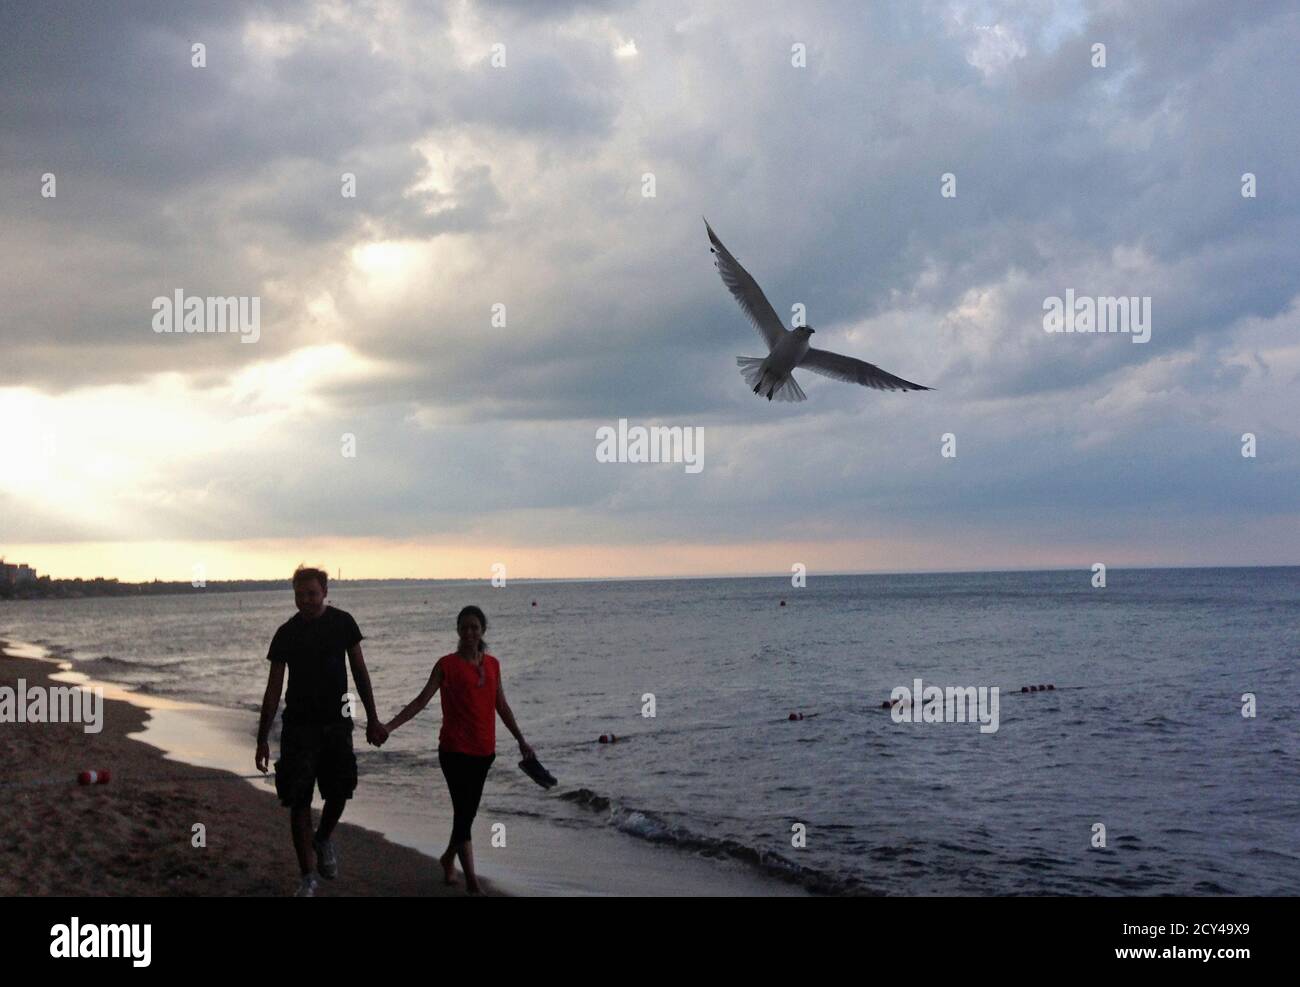 A seagull flies over a couple walking along Gillson Beach in Wilmette, Illinois, June 28, 2014.  TREUTERS/Jim Young  (UNITED STATES - Tags: ENVIRONMENT SOCIETY ANIMALS) Stock Photo